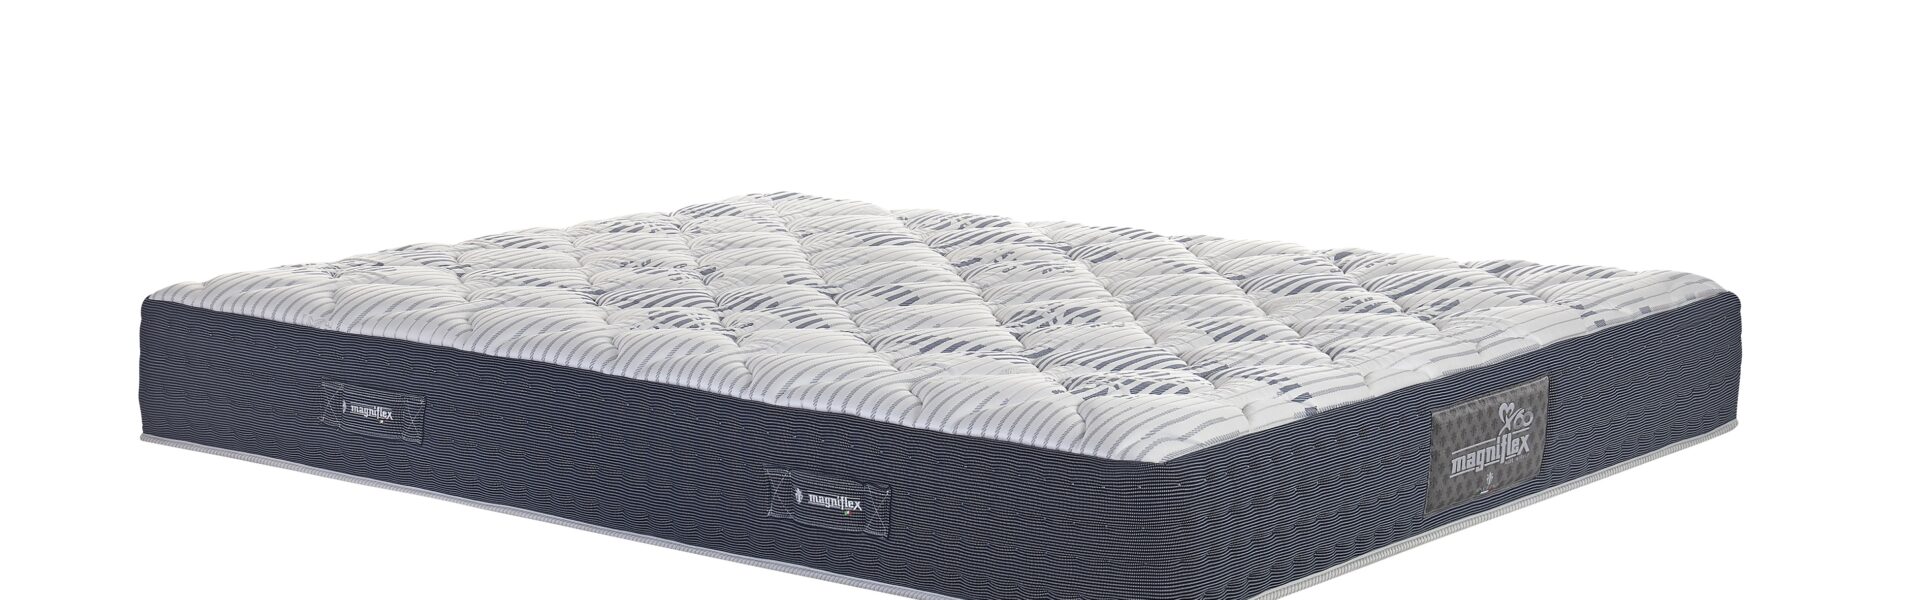 Magnicool mattress with cooling technology